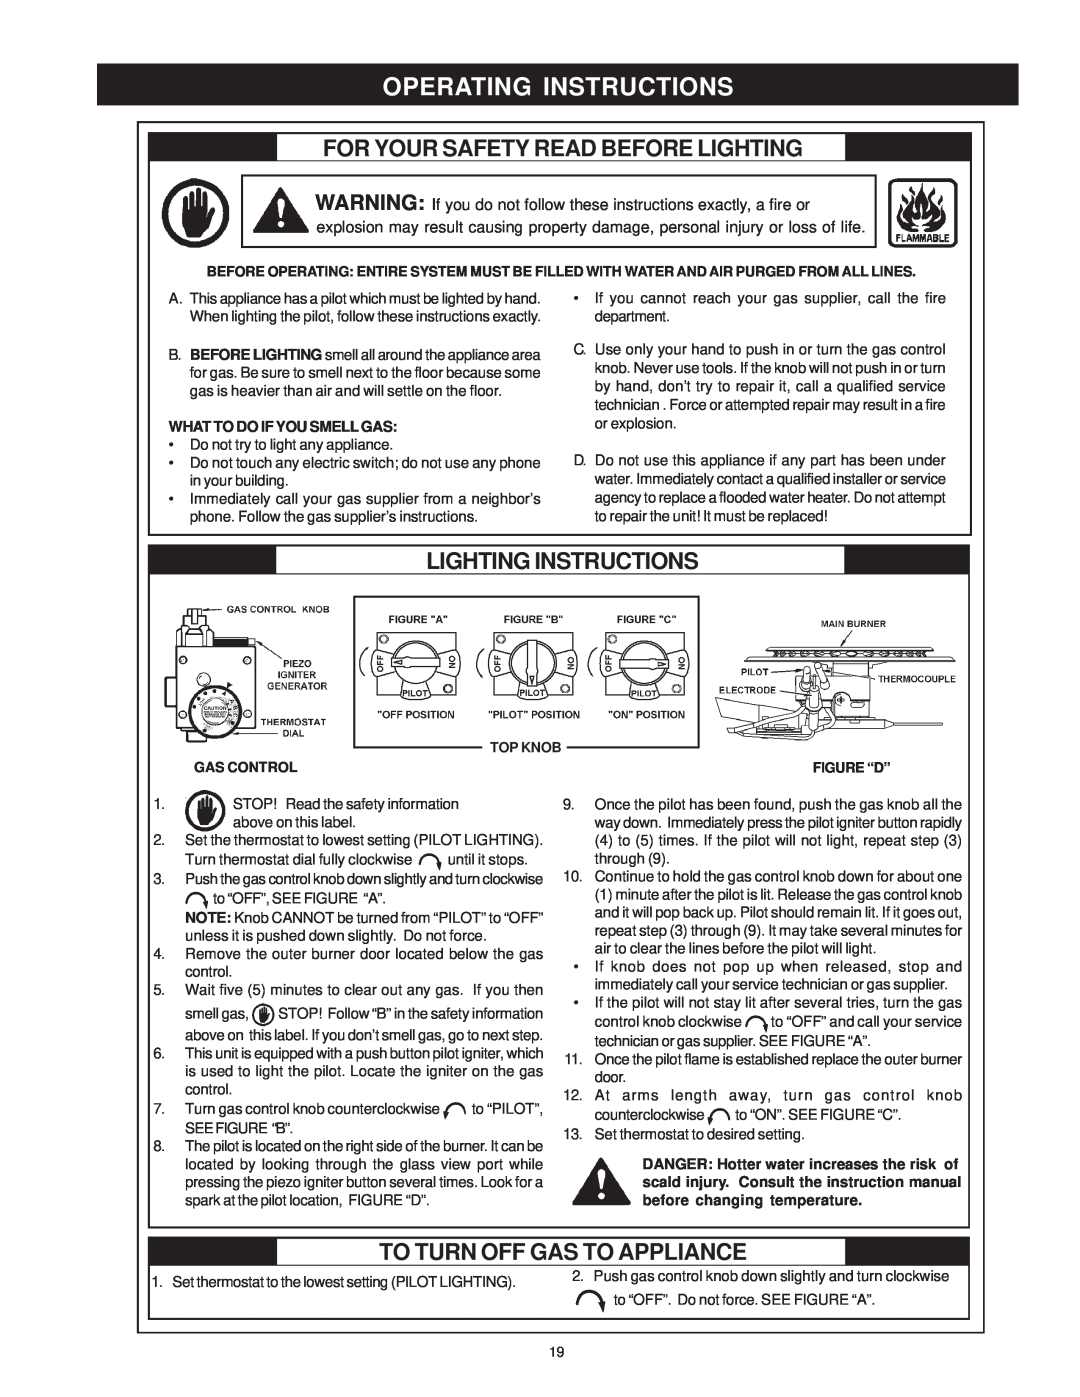 Maytag HRN31250Q, HRN11240X, HRN11250Q Operating Instructions, For Your Safety Read Before Lighting, Lighting Instructions 